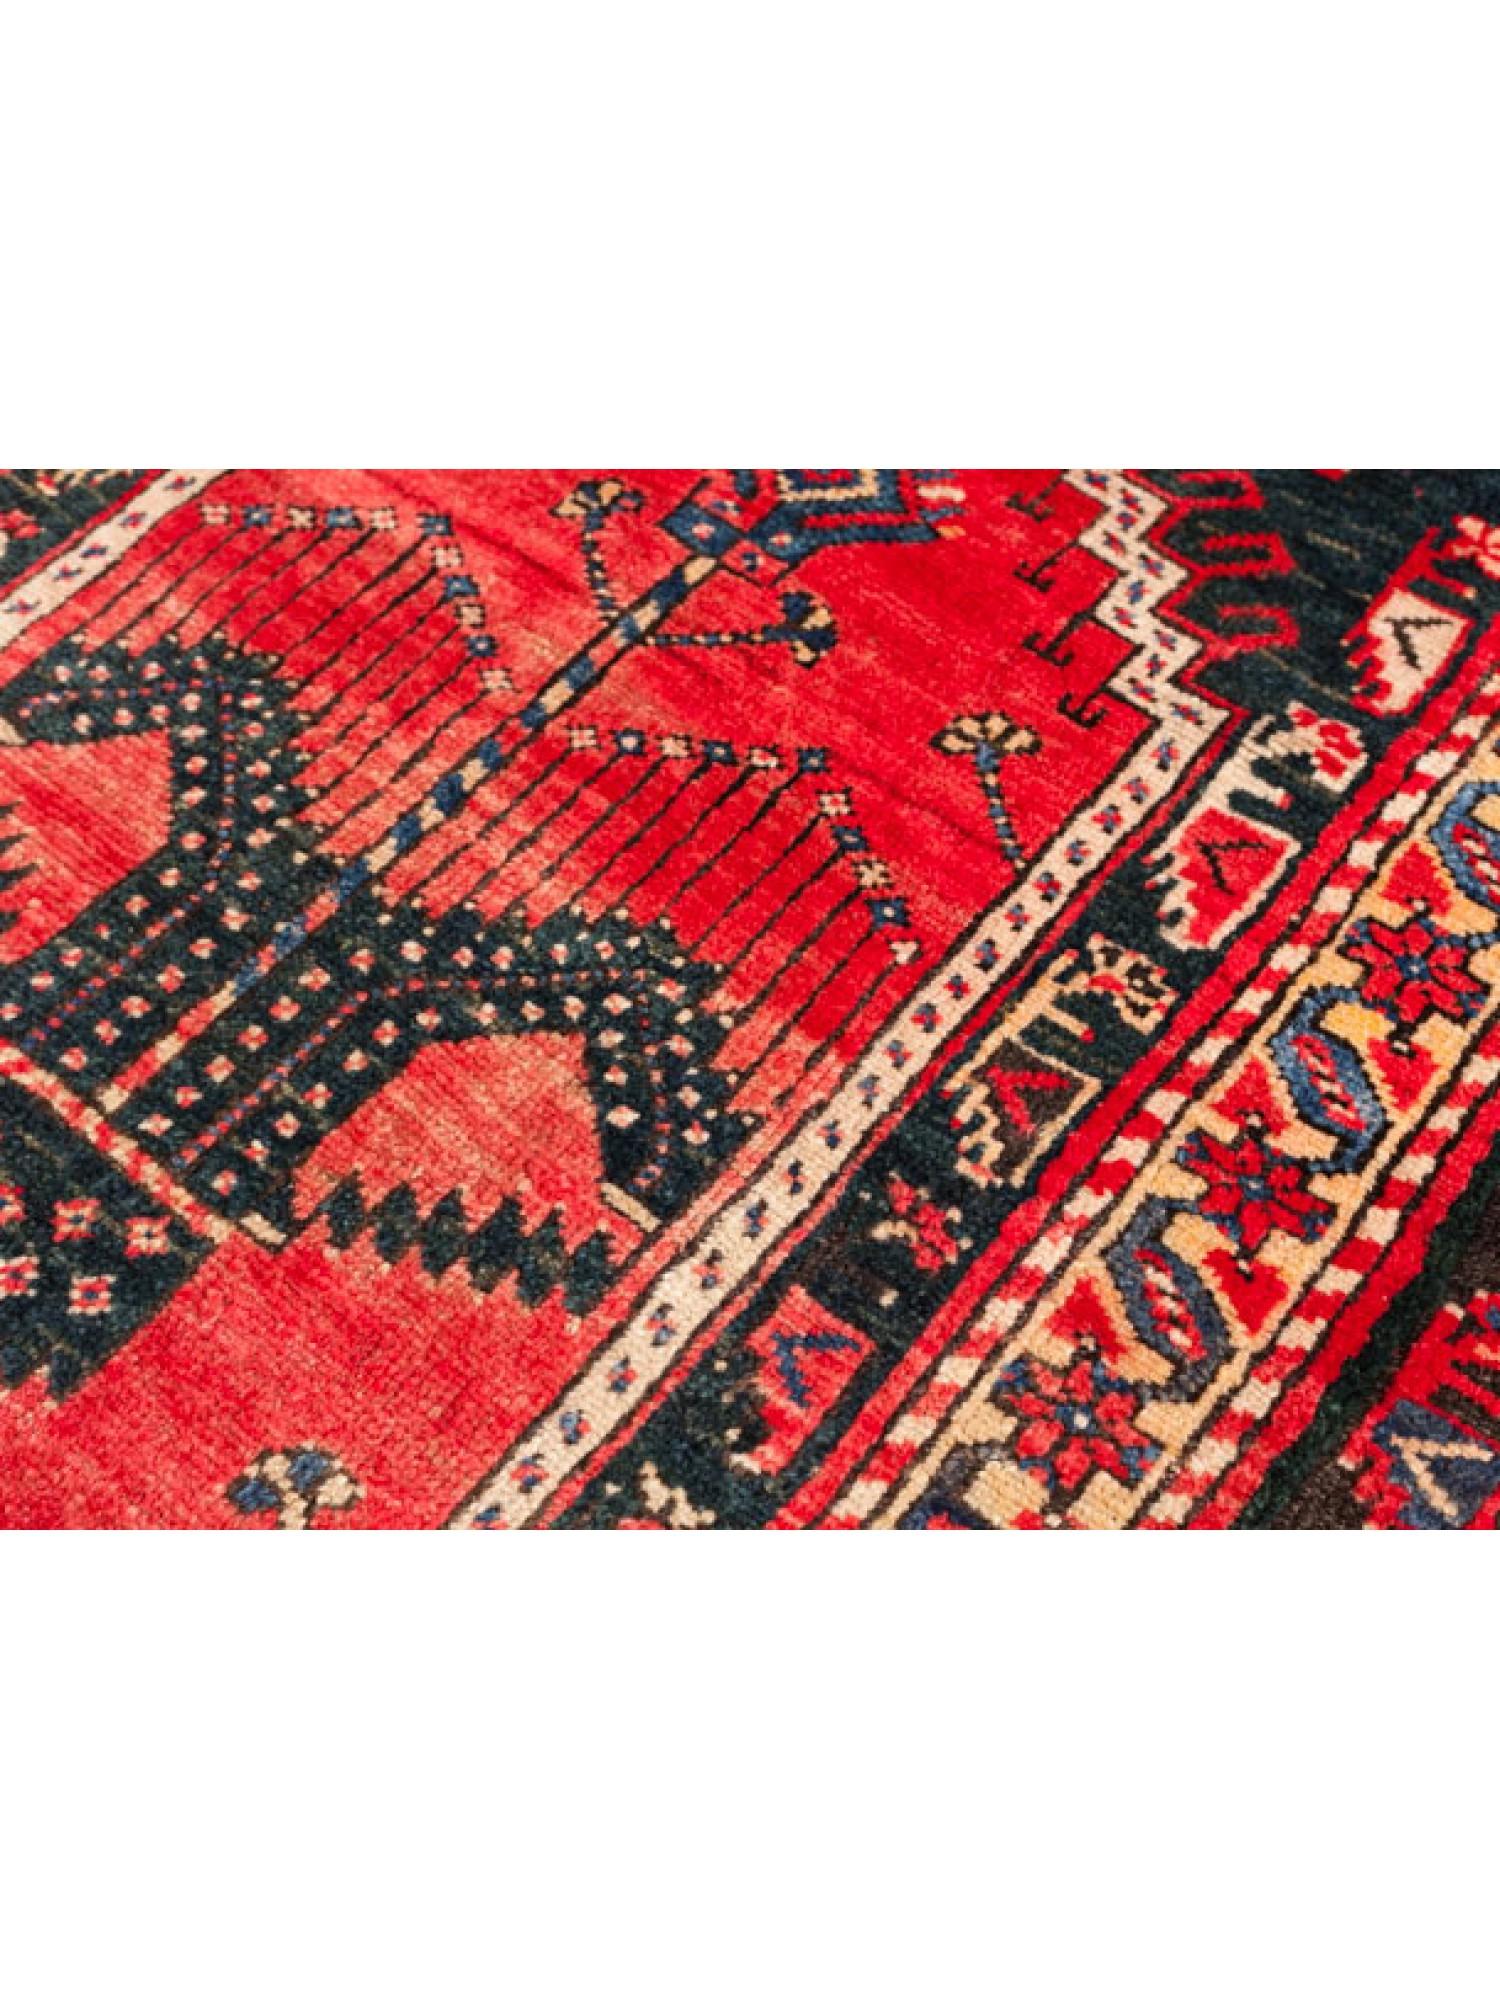 This is an antique prayer ( mihrab ) rug from the Western Anatolia, Ghiordes ( Gördes ) region with a very rare and beautiful color composition.

Ghiordes rugs, also known as Gordes prayer rugs or Ghiordes mats, are a type of handwoven prayer rug